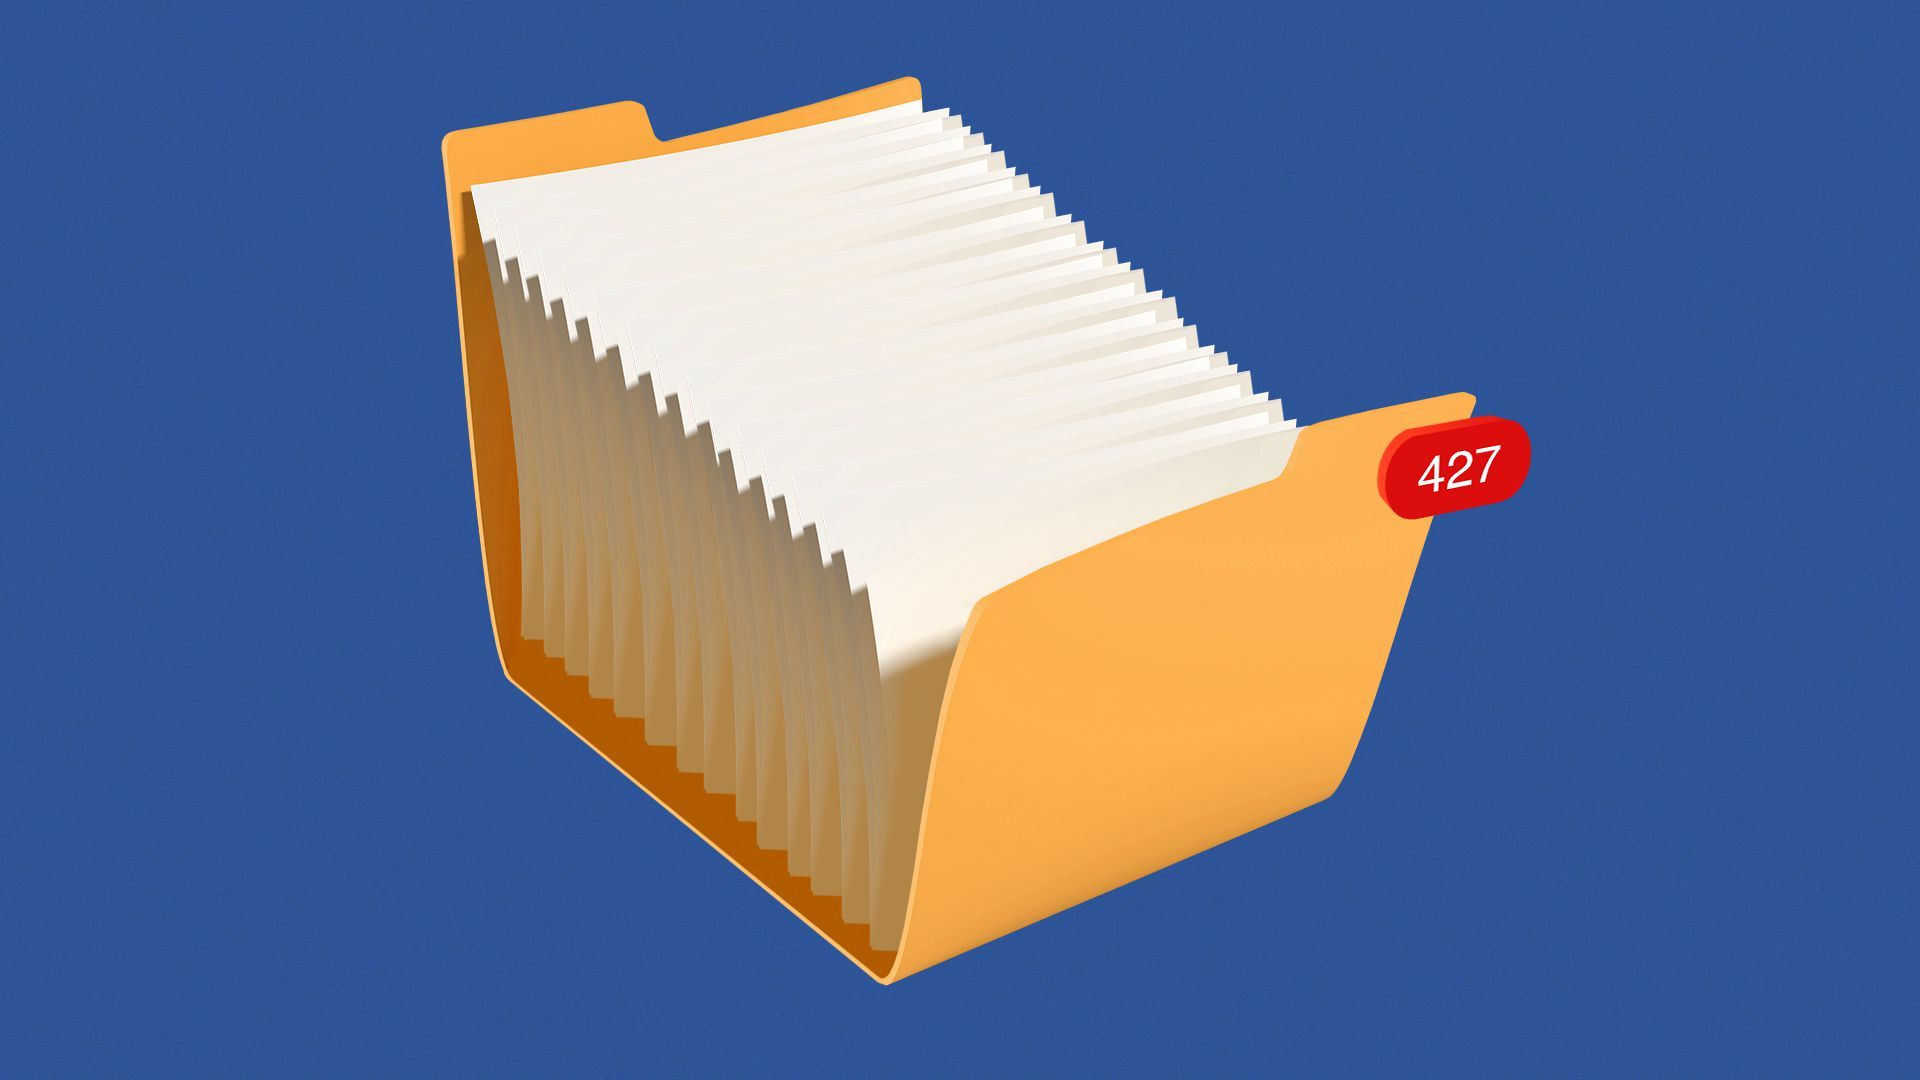 Illustration of a desktop folder icon filled with paper and a notification badge that reads 427.